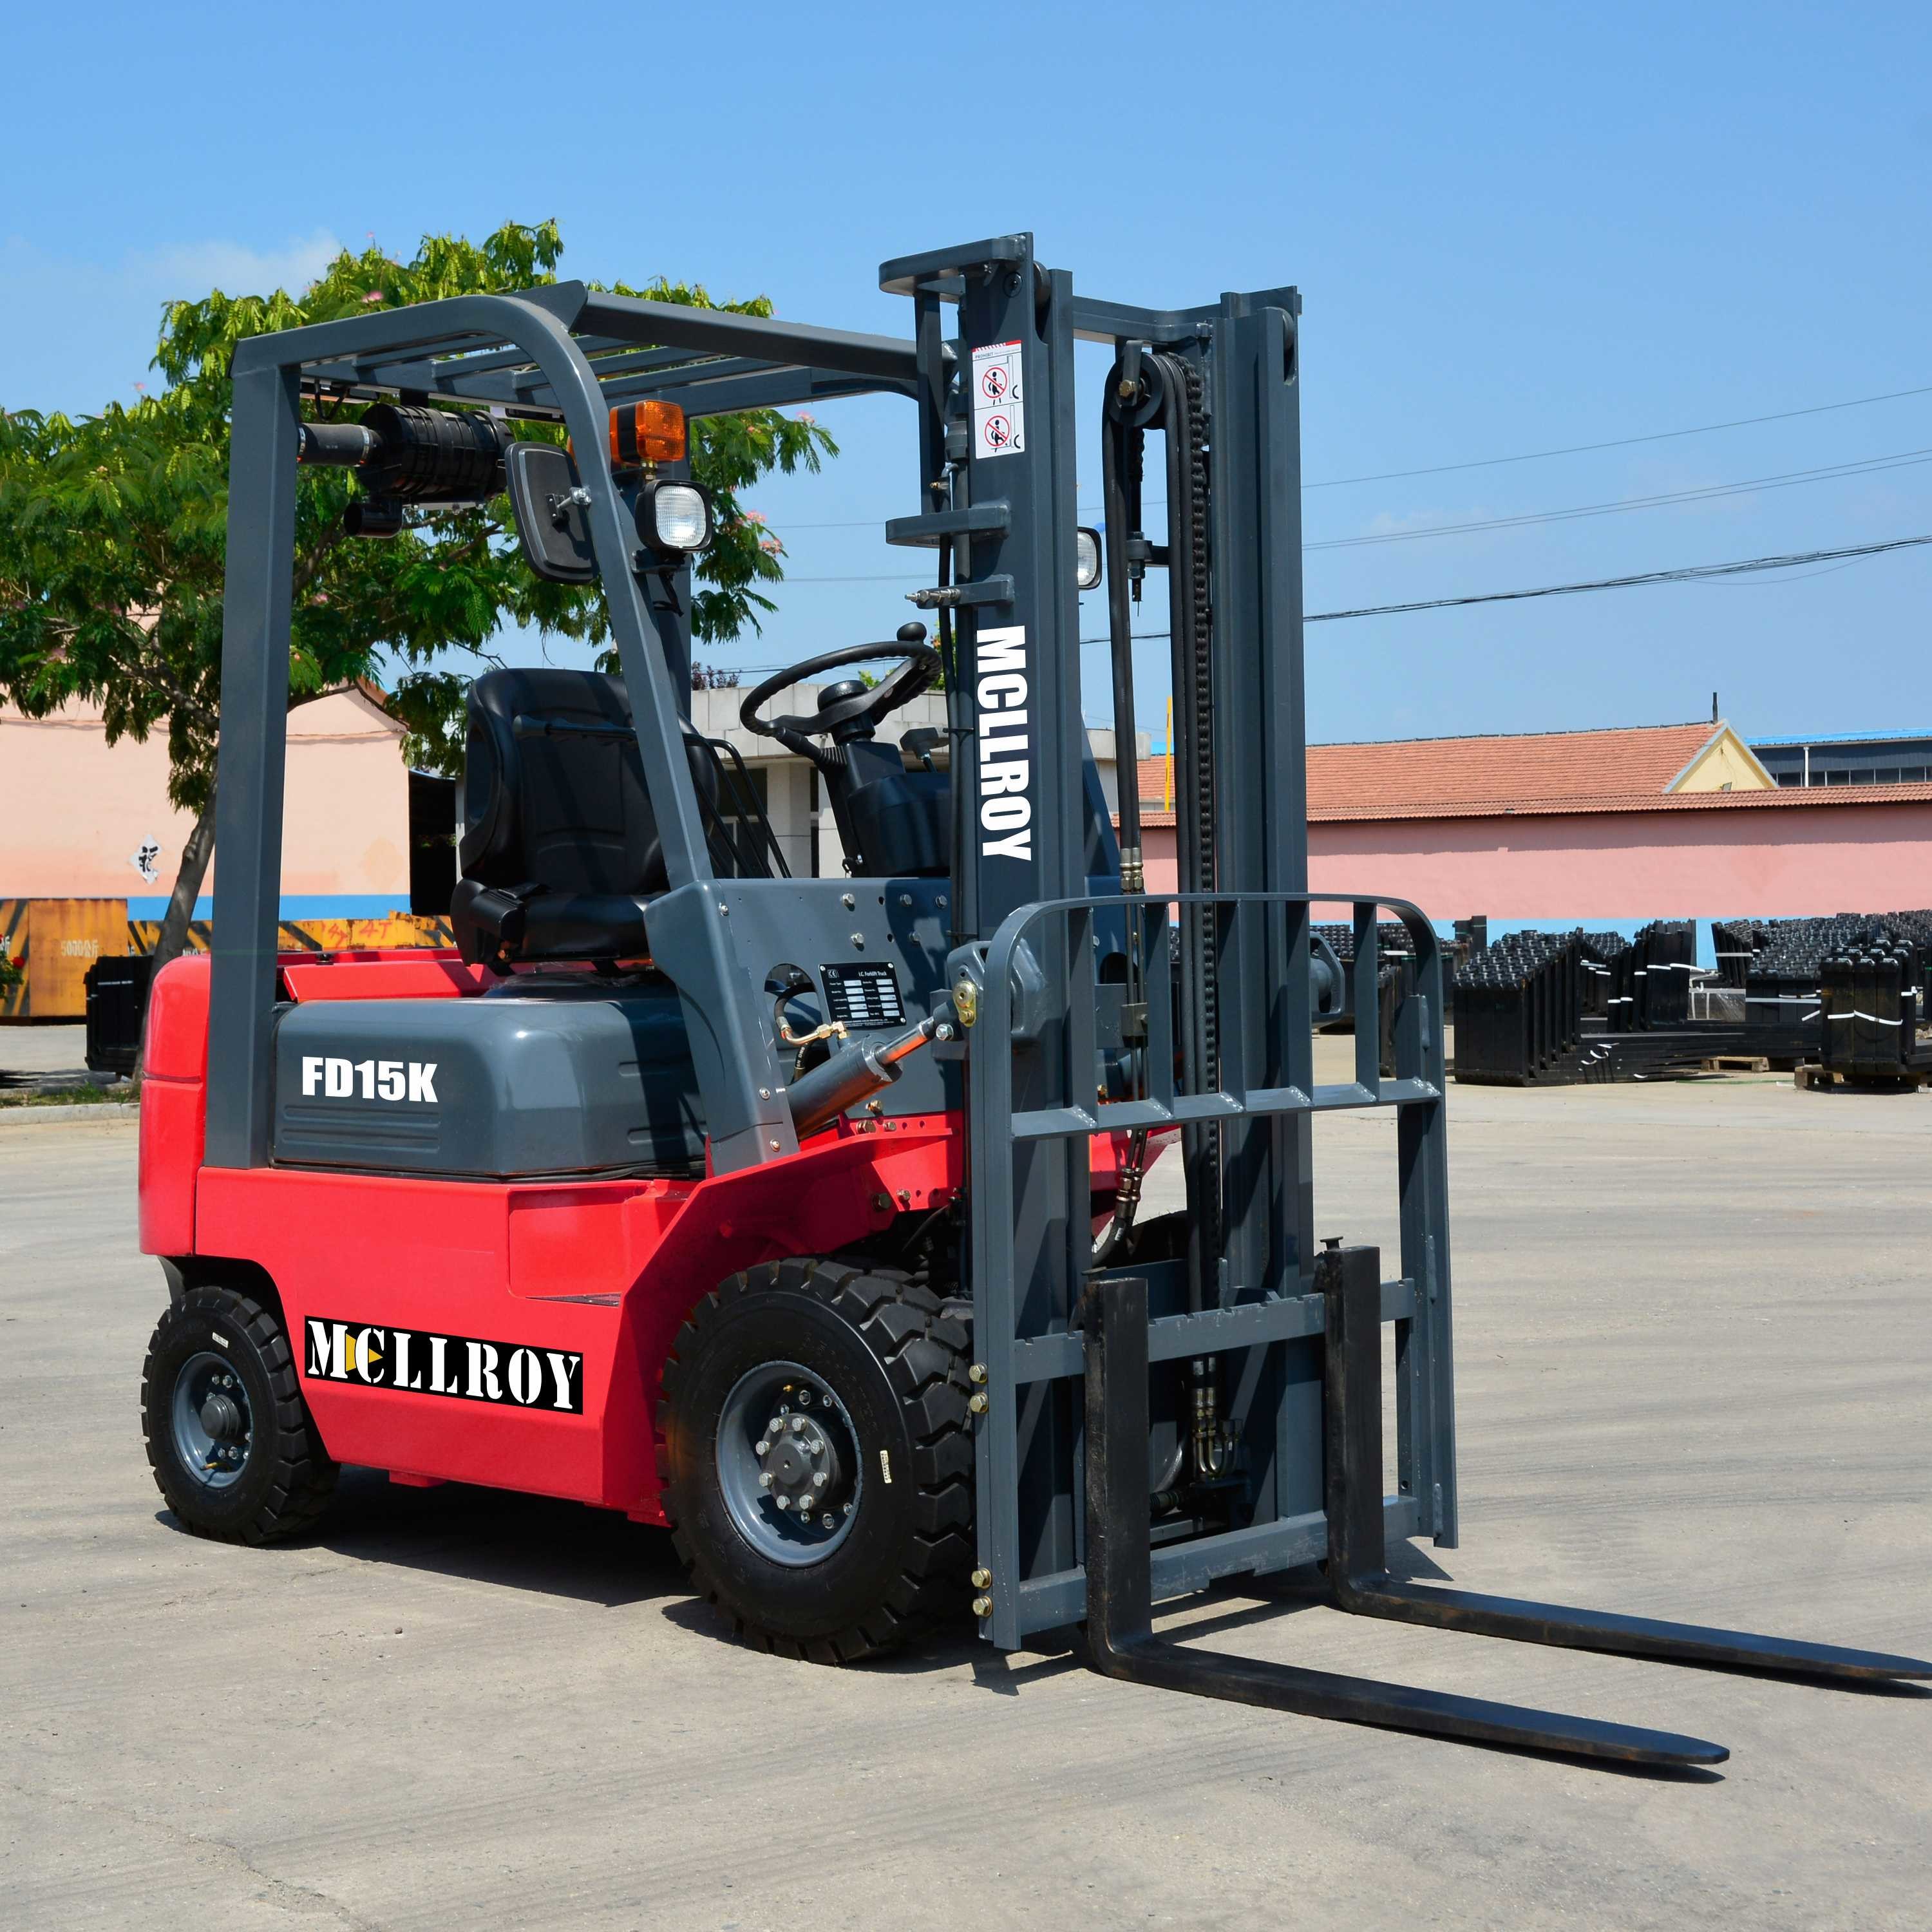 32KW Engine Counterweight Forklift FD15 Air / Solid Tire Type